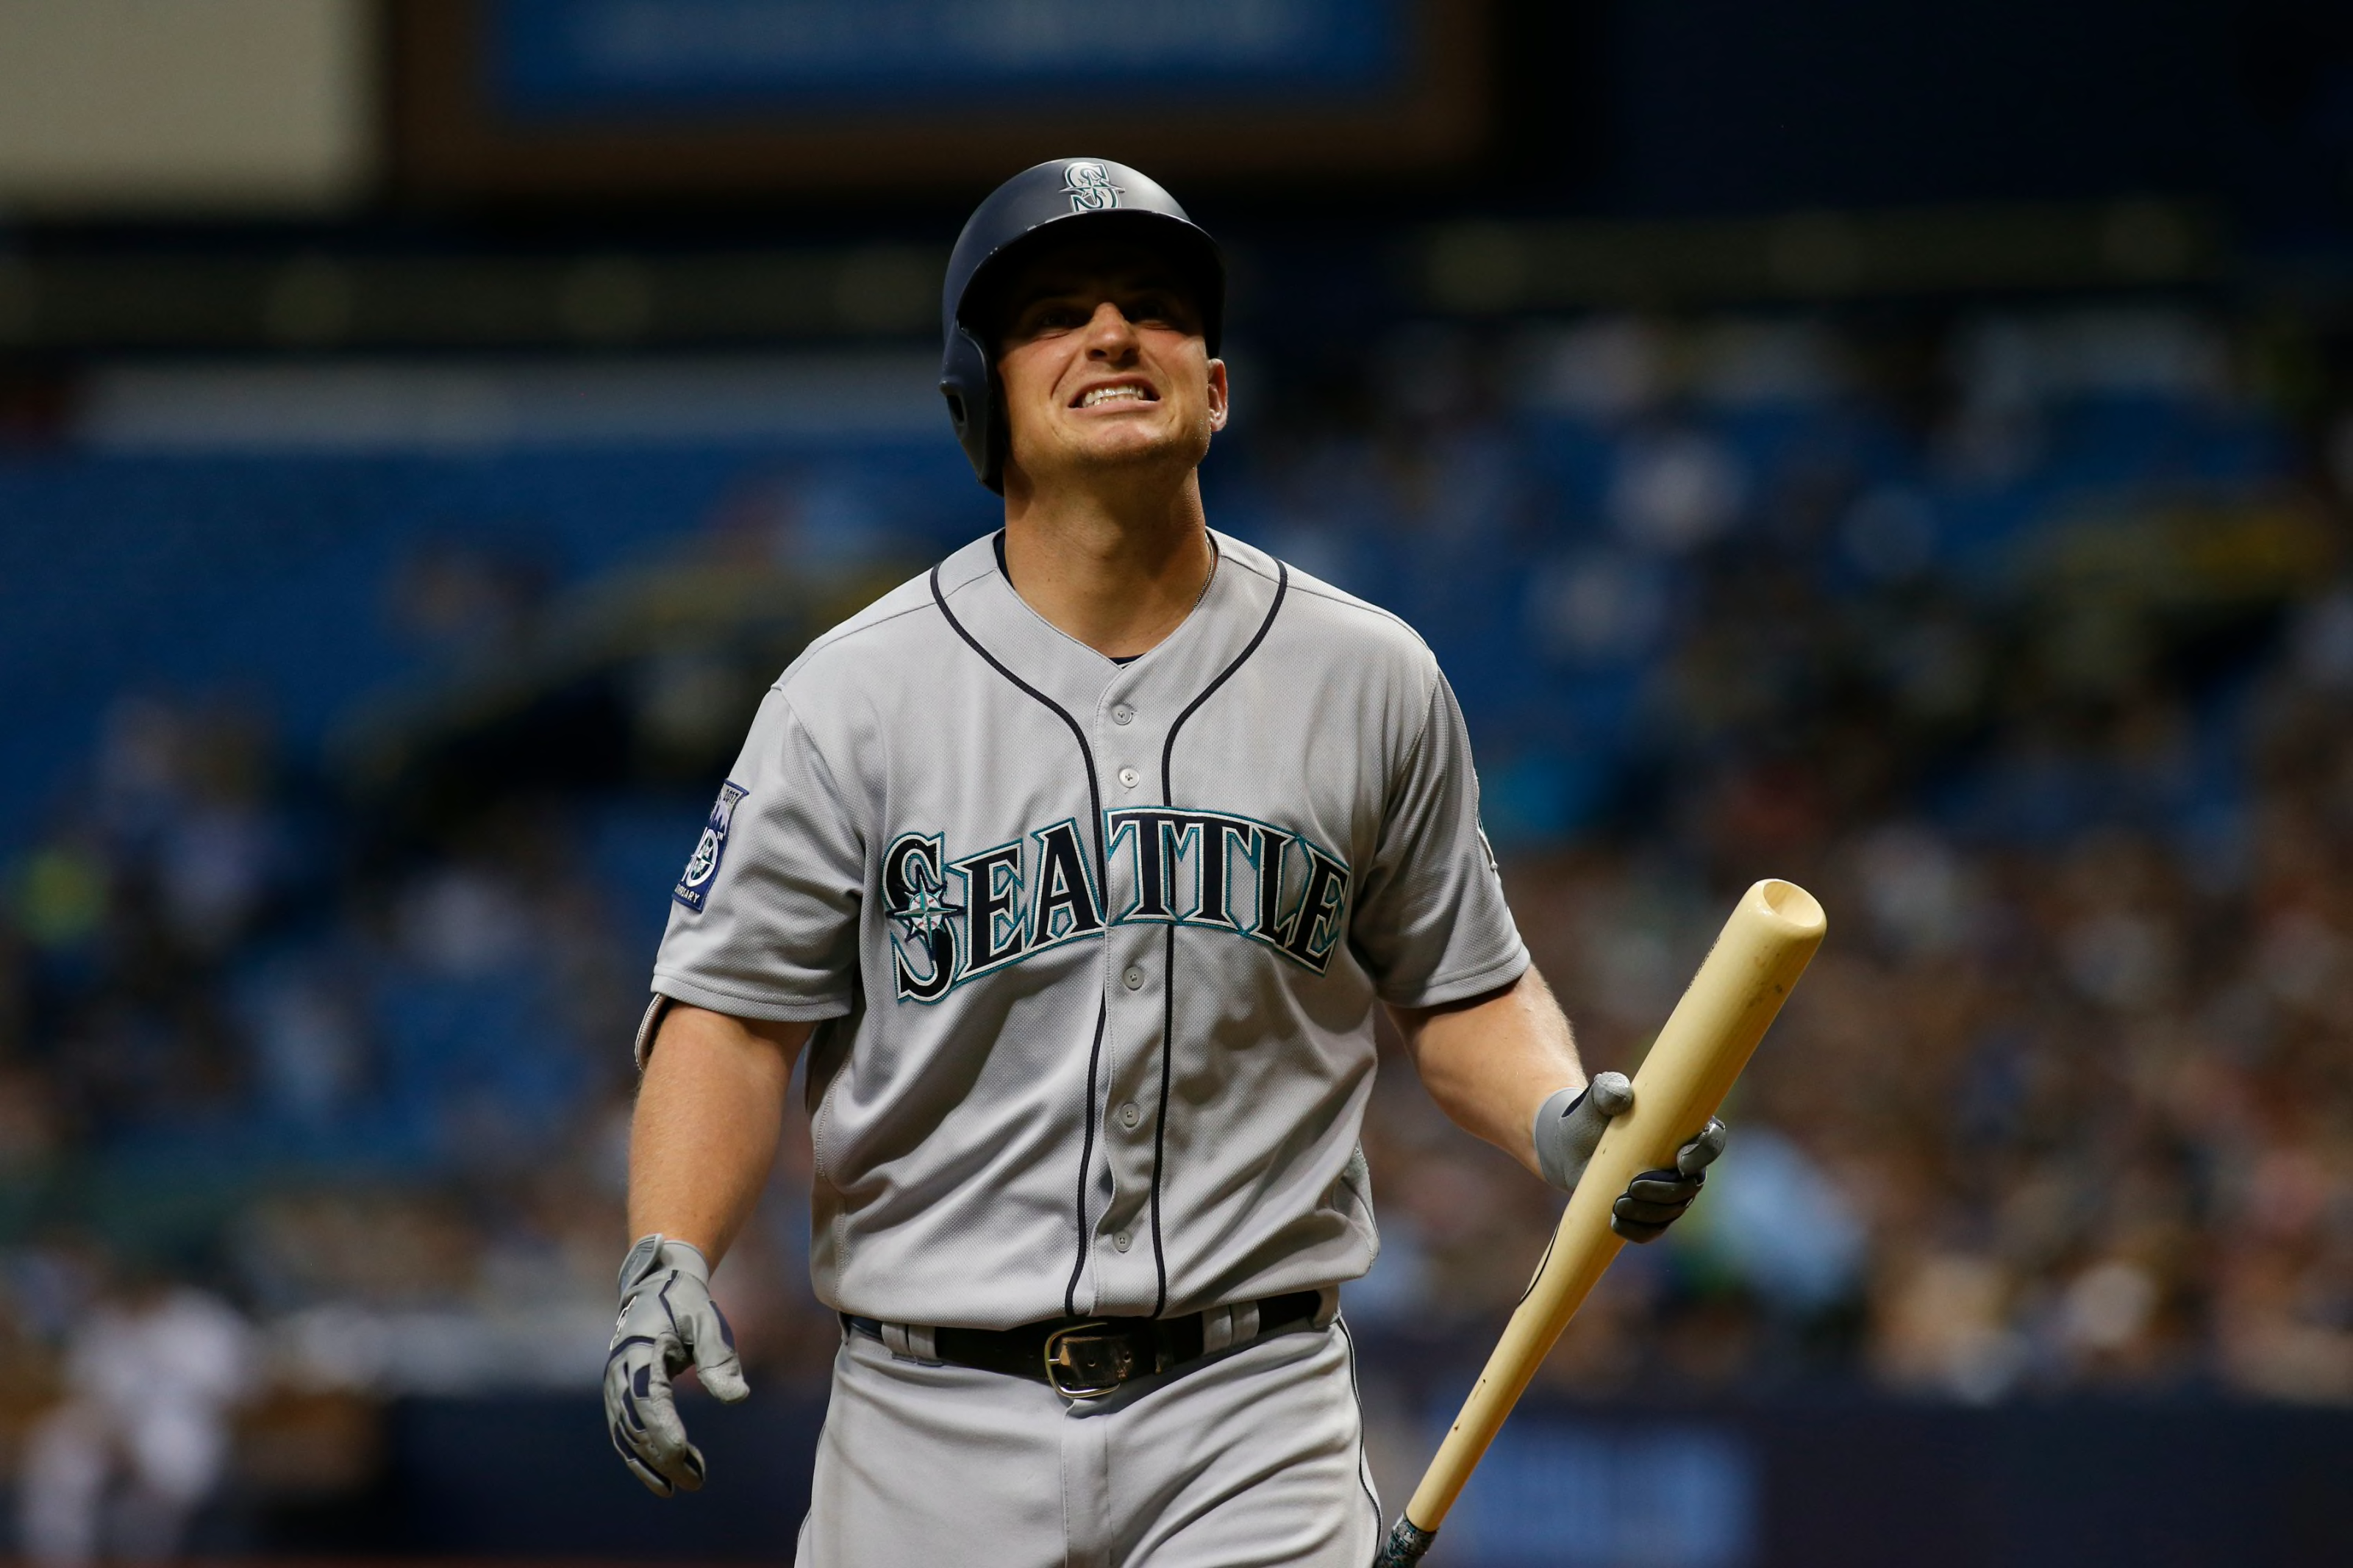 Seattle Mariners: Kyle Seager's accelerated free fall in 2018